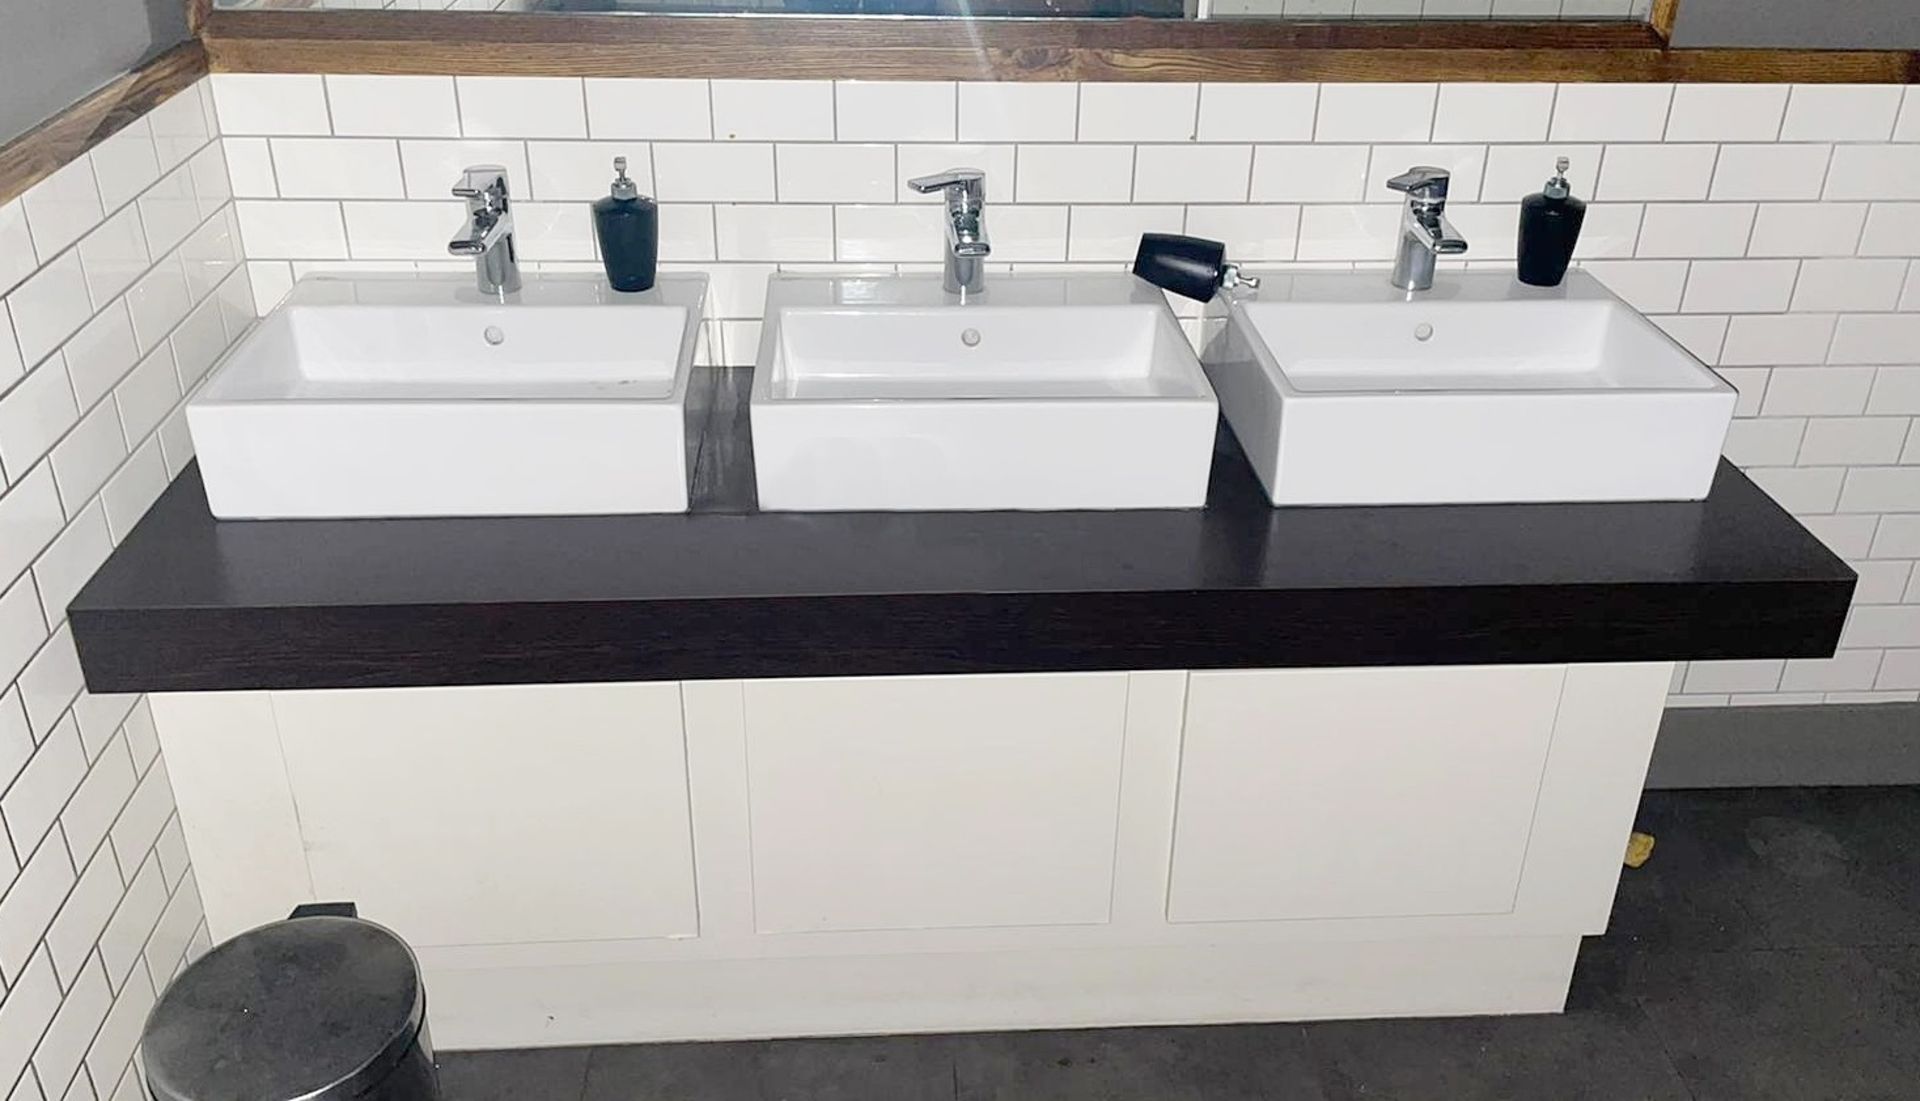 1 x Bathroom Sink Unit With Three Ceramic Countertop Sink Basins and Mixer Taps - Dimensions H120